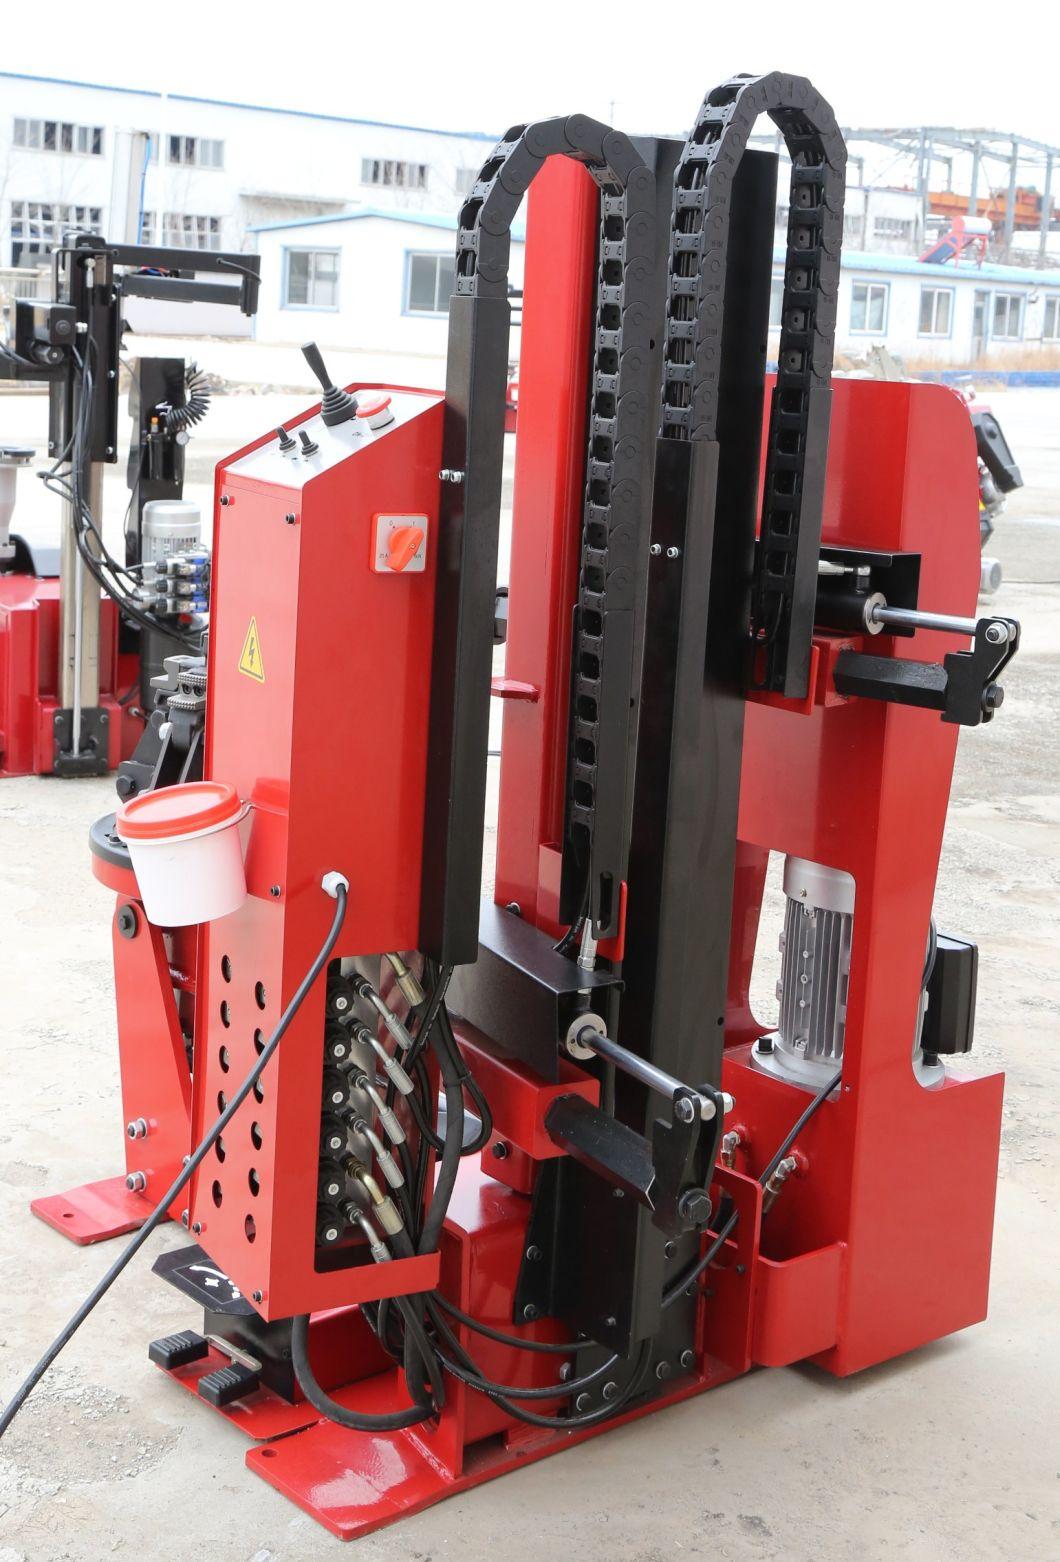 China Factory Supply 14-26inch Heavy Duty Truck Tyre Changer for Garage Equipment